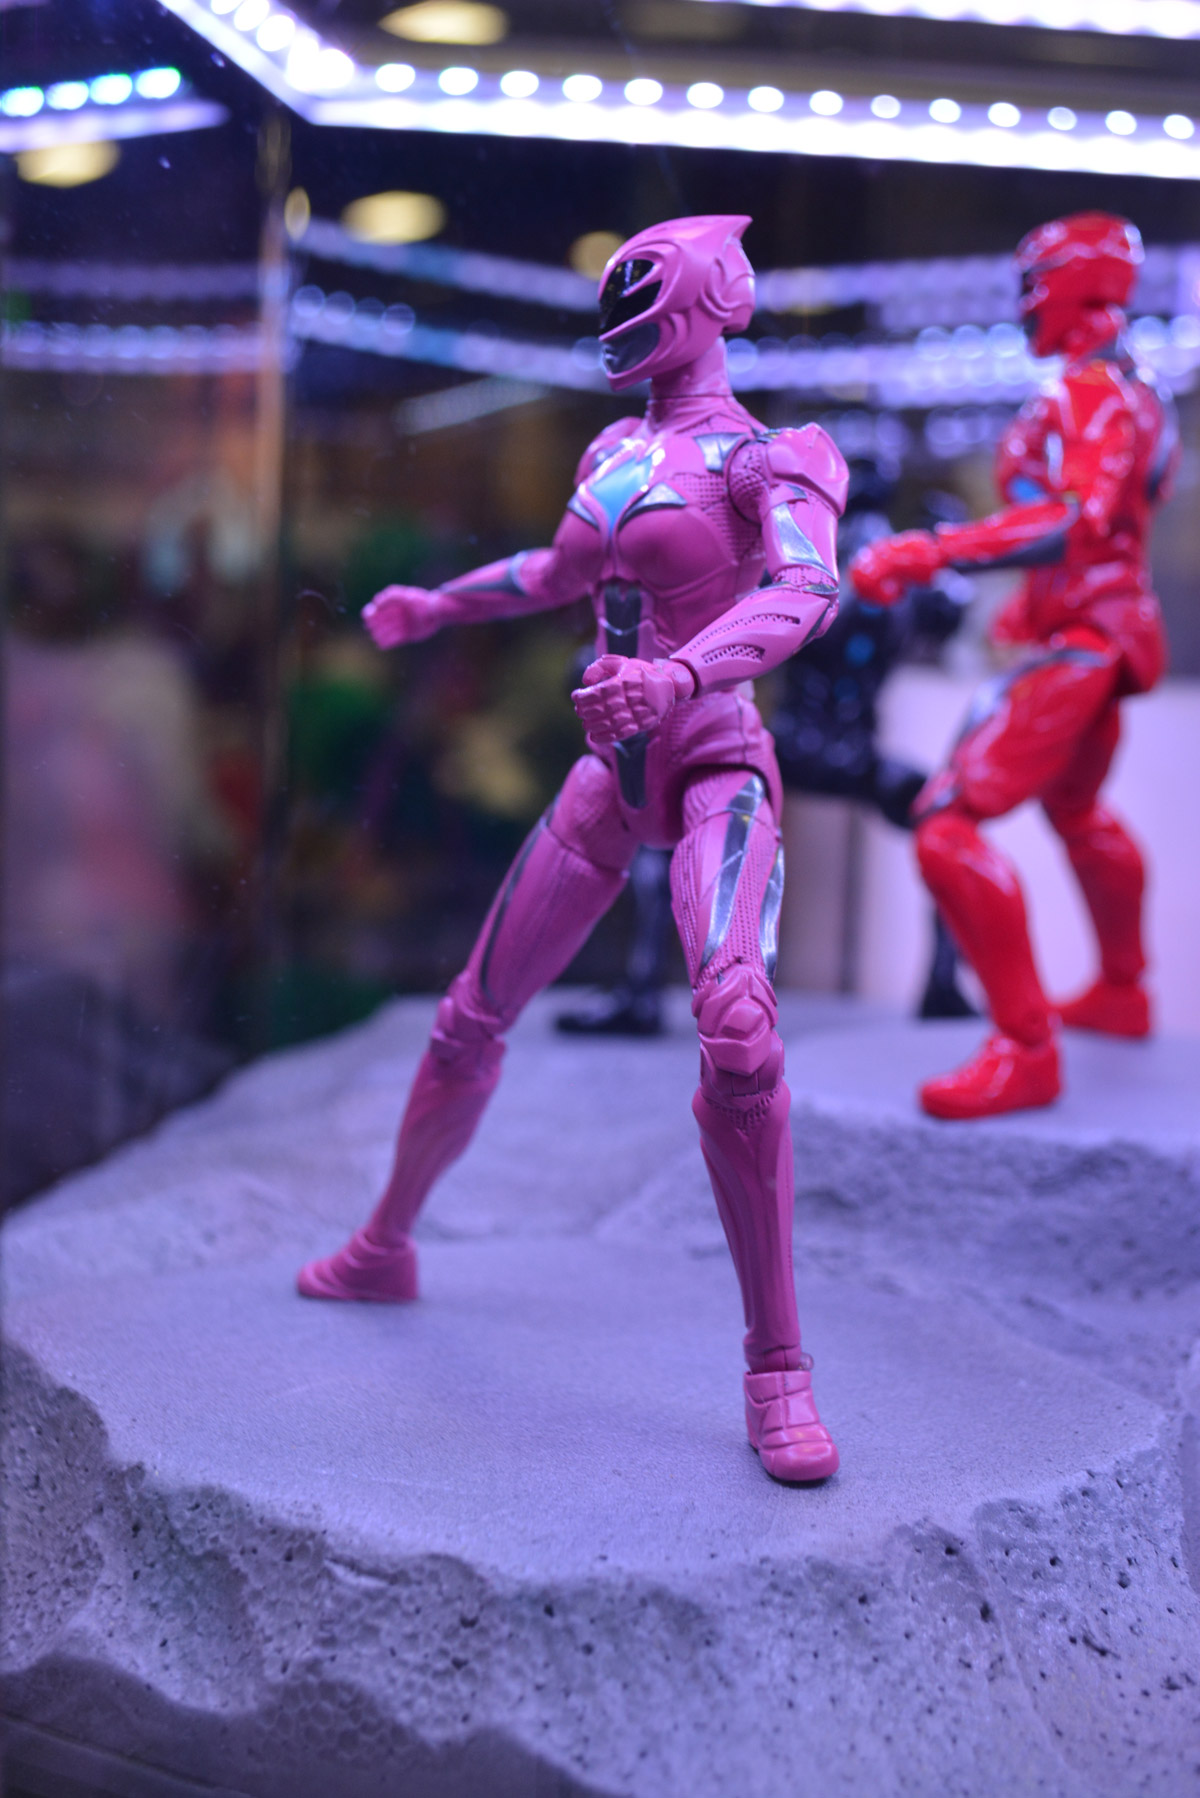 SDCC16: Power Rangers Action Figures Show New Movie Look ...
